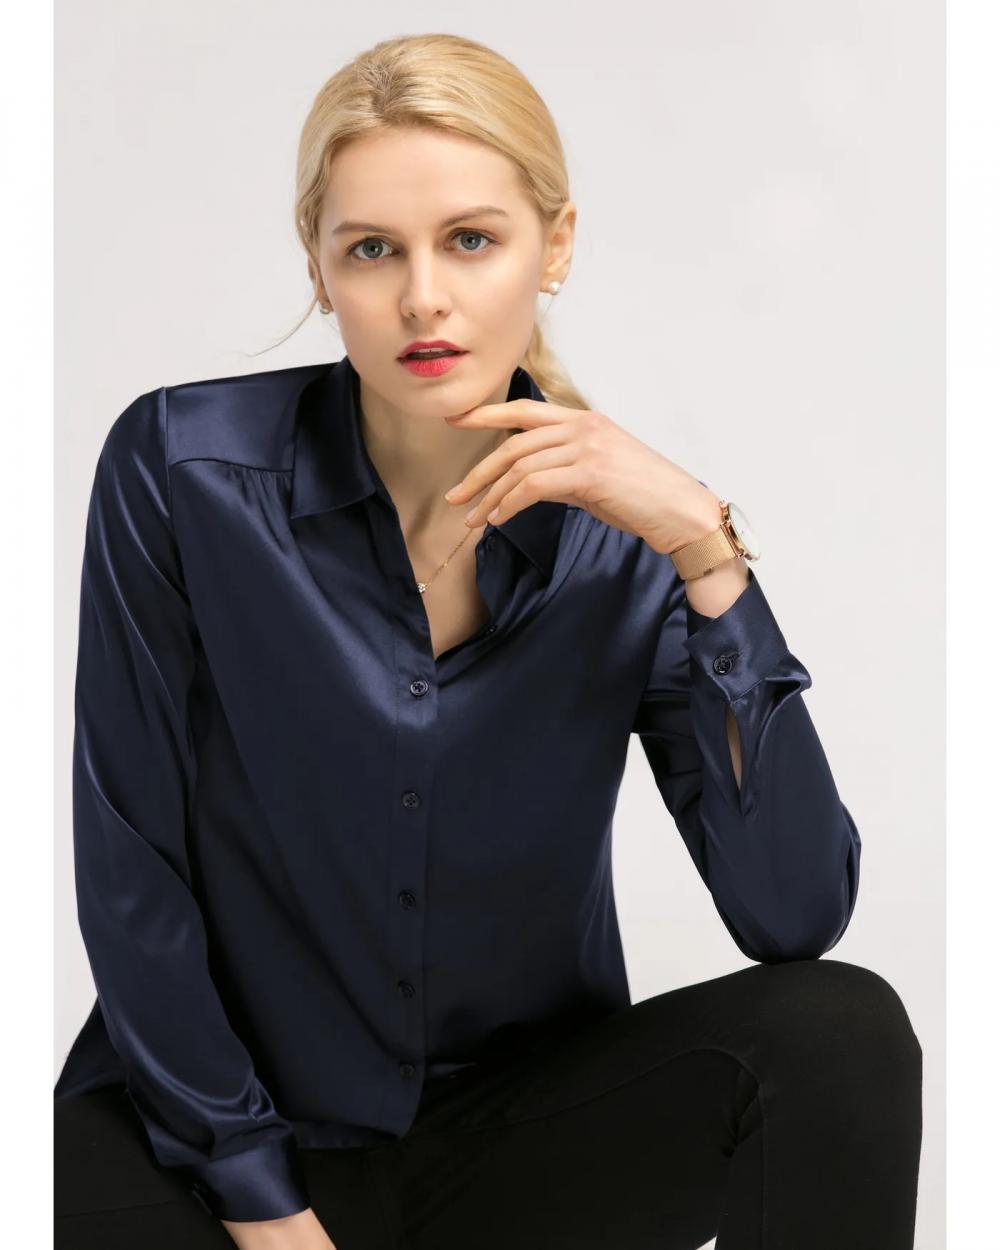 Silk Blouse for Women 100% Pure Silk Long Sleeves Cool Smooth Tops Long Sleeve Button Down Shirt Casual Work Office Silky Blouse